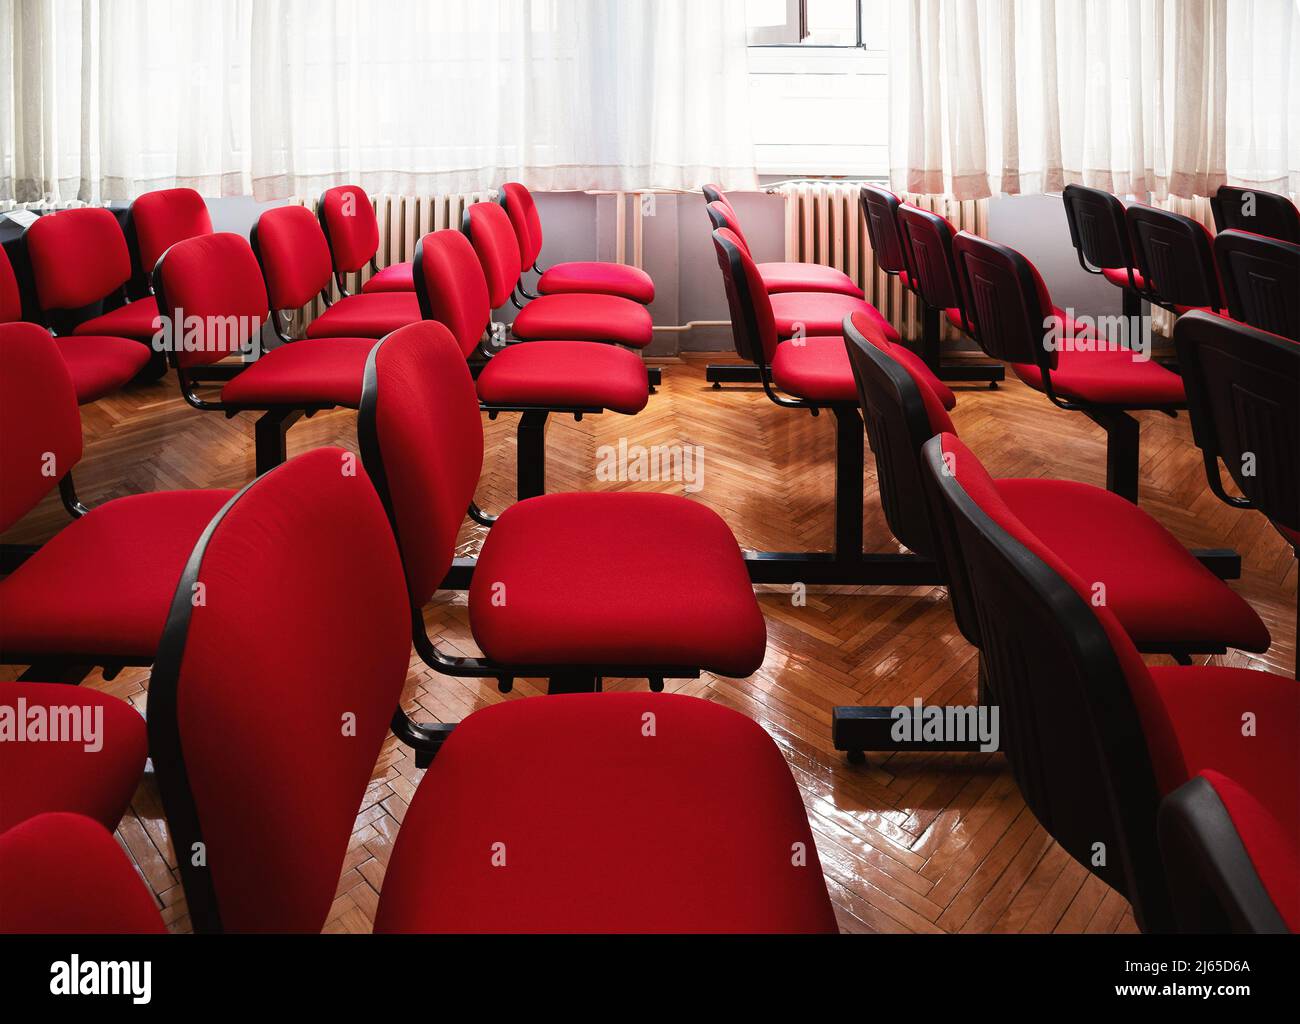 Interior of a classroom with red chairs. Stock Photo